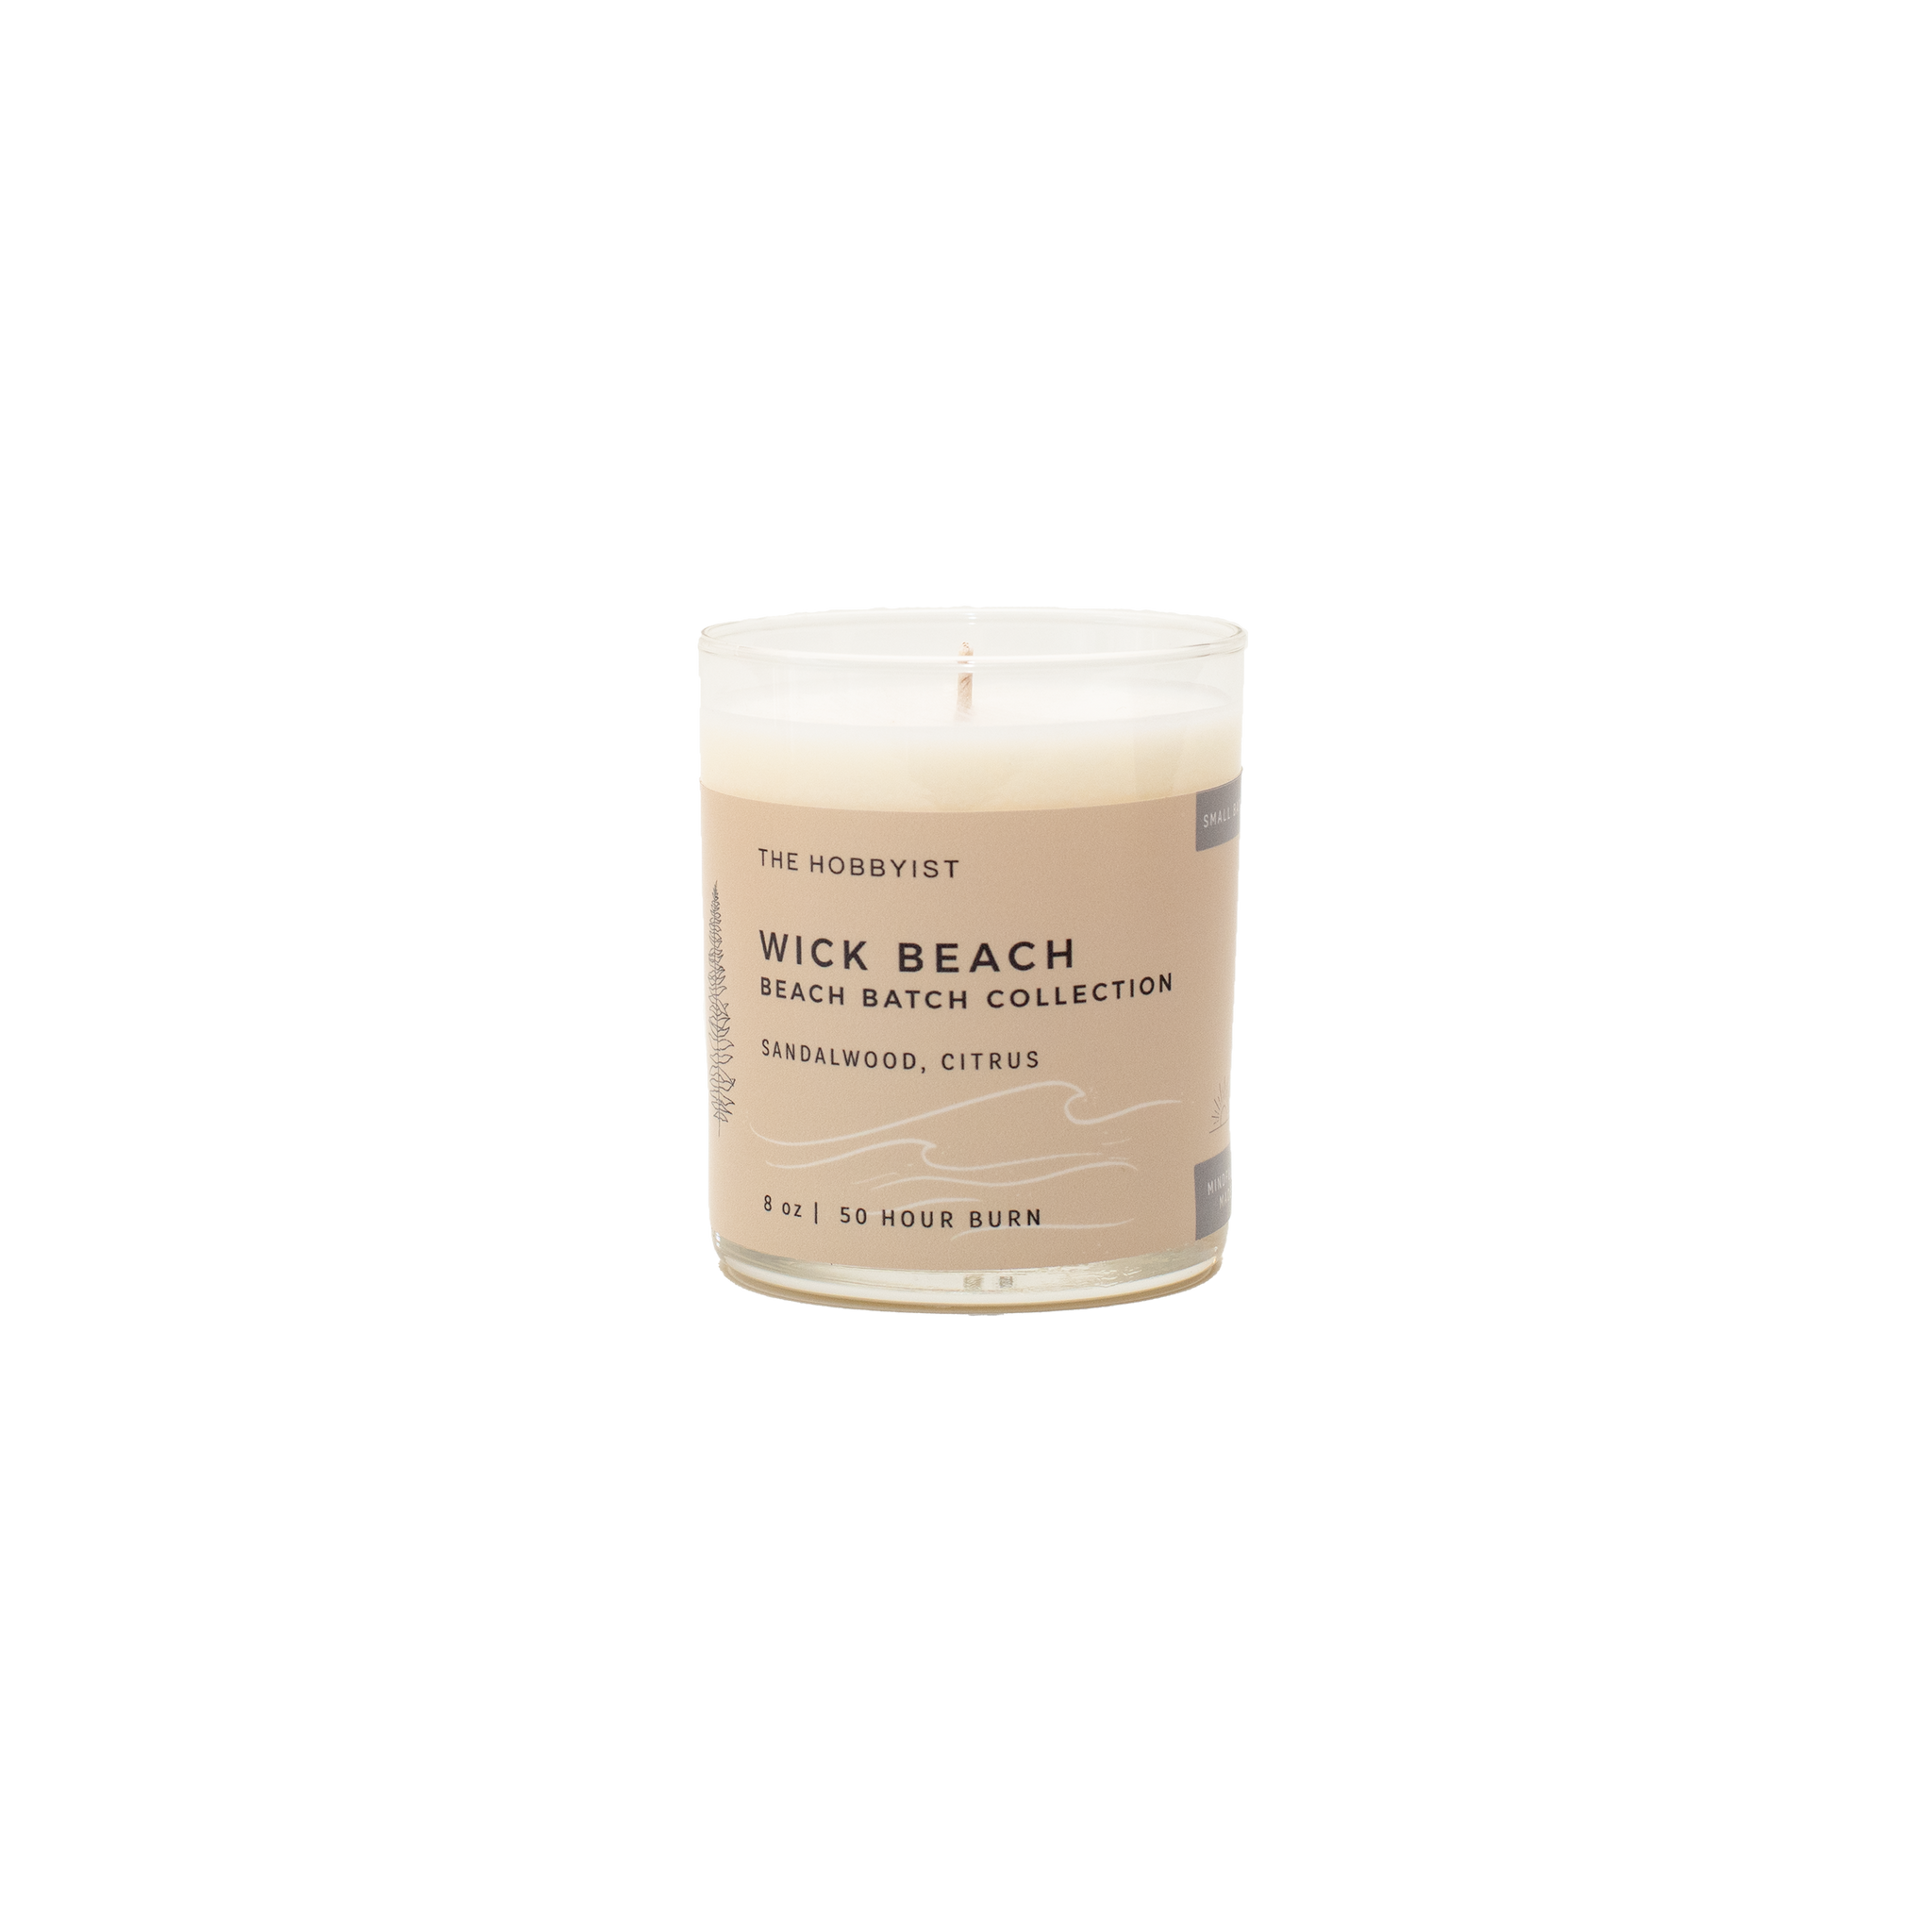 Product photo of the Wick Beach Candle from our Beach Batch Collection